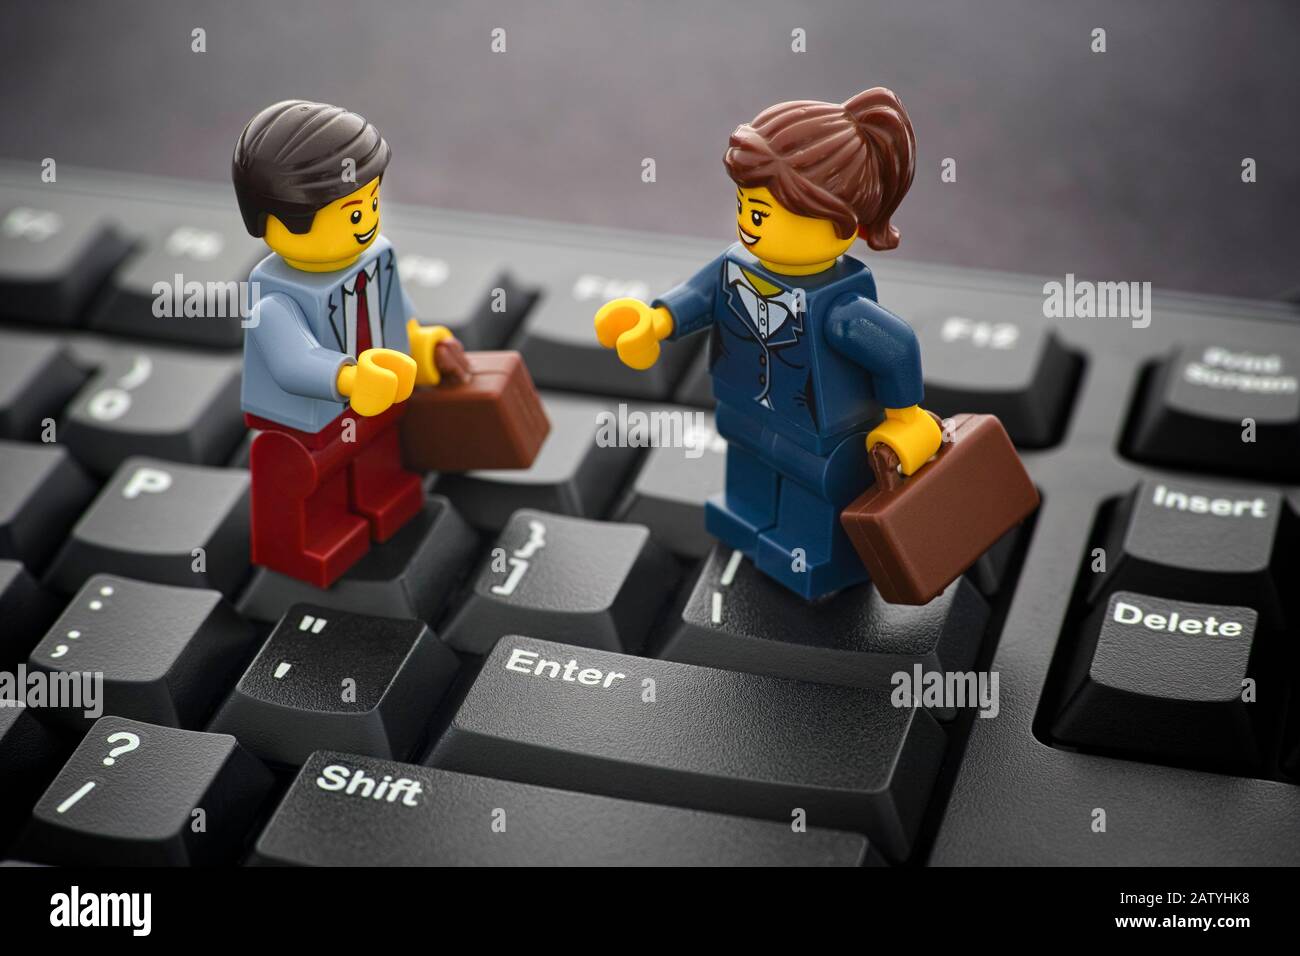 Tambov, Russian Federation - January 24, 2020 Lego businessman and businesswoman minifigures standing on a black computer keyboard. Stock Photo